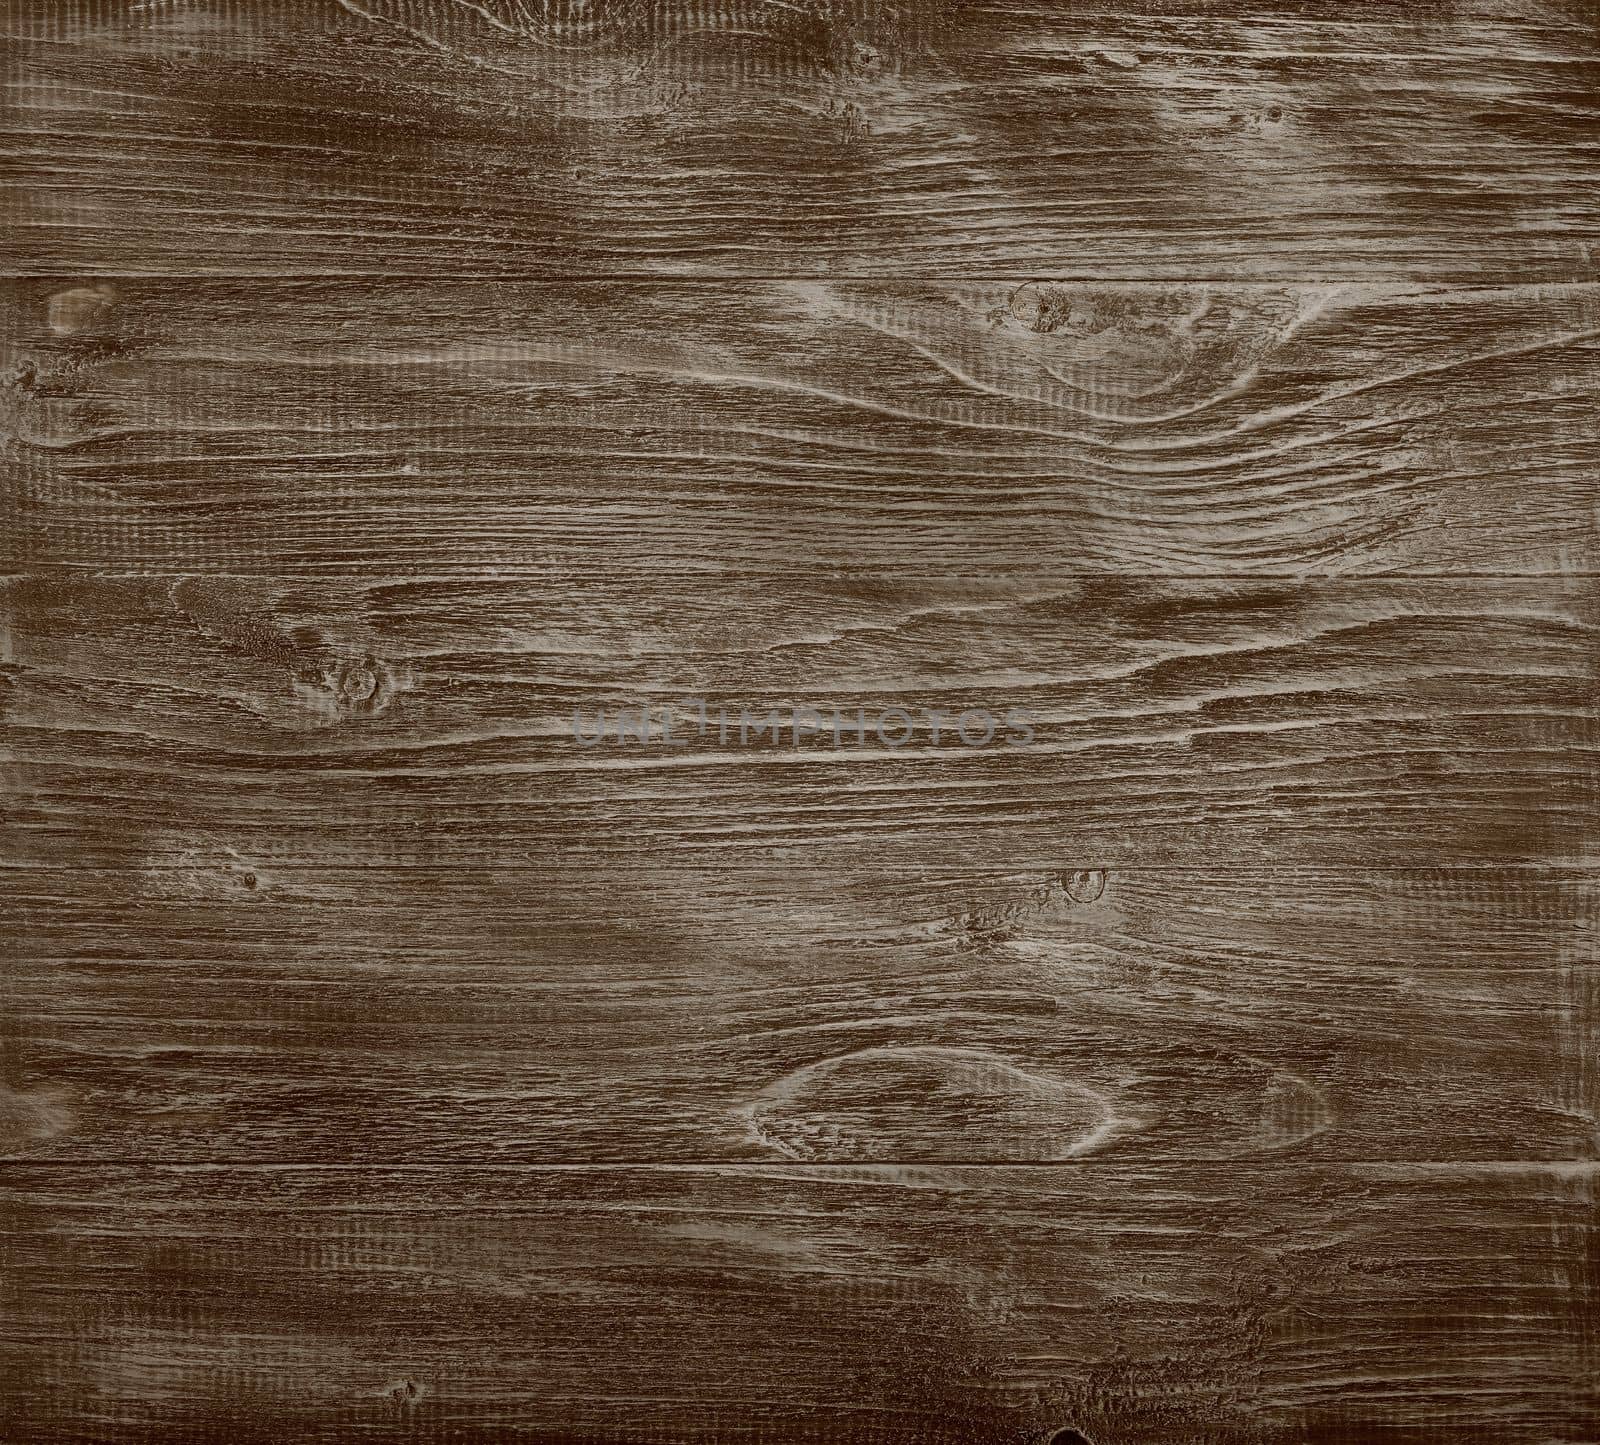 Close up background texture of brown vintage weathered painted wooden planks, rustic style wall panel